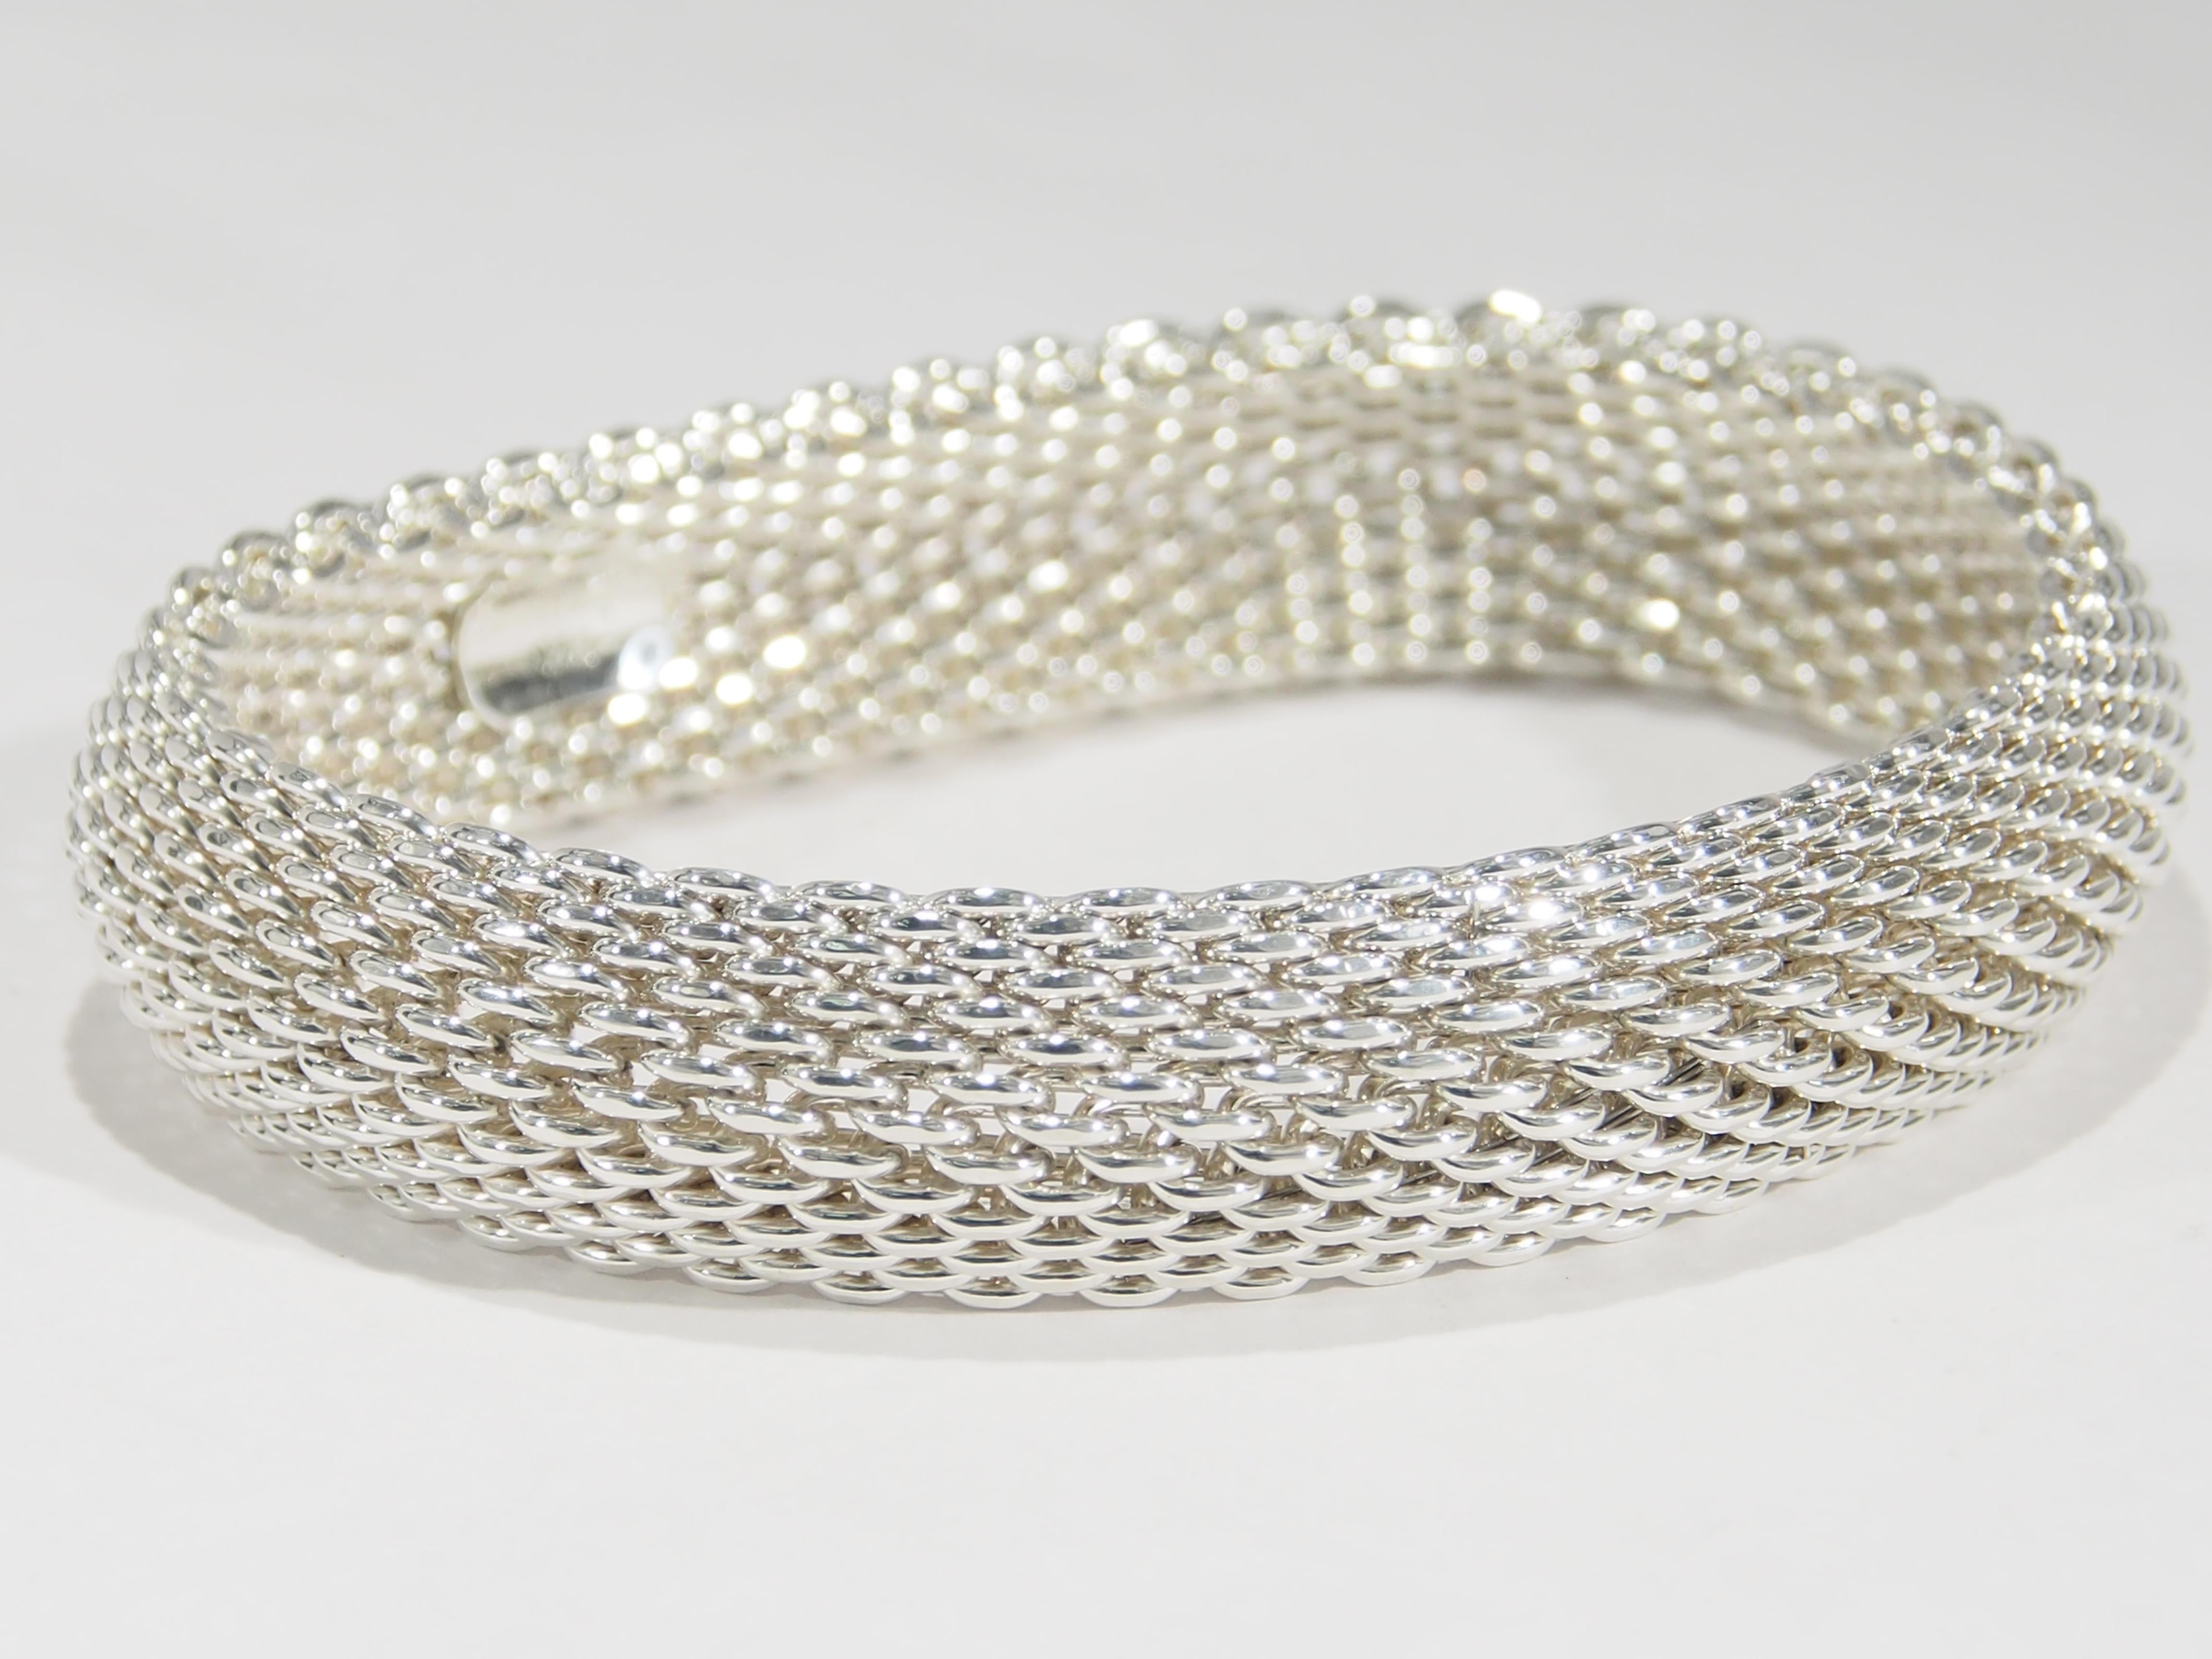 From one of the favorite jewelry designers, Tiffany & Company is this Sterling Silver Mesh Bracelet from their Somerset Collection. This classic Bracelet is 5/8 of an inch in width, a size 7 1/2 and has the 